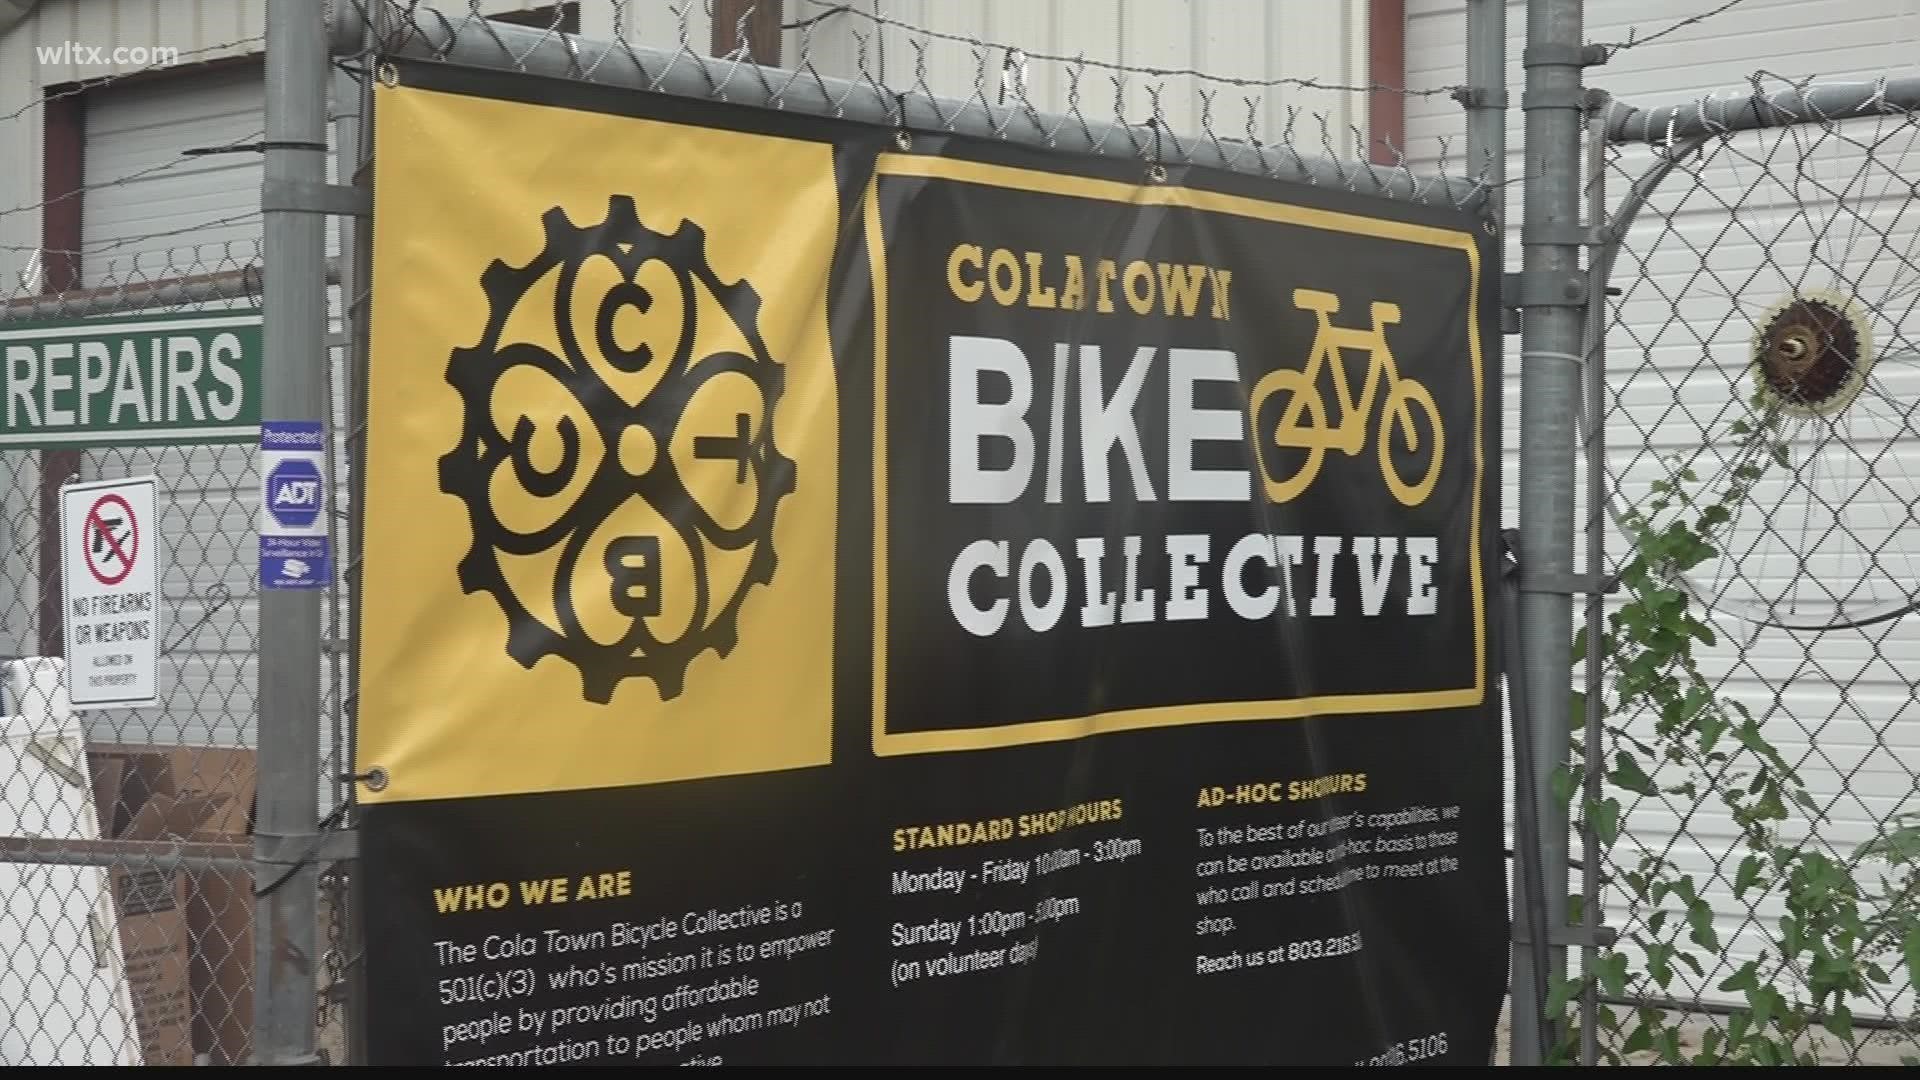 Cola Town Bike Collective is trying to raise money to buy the building they are in.